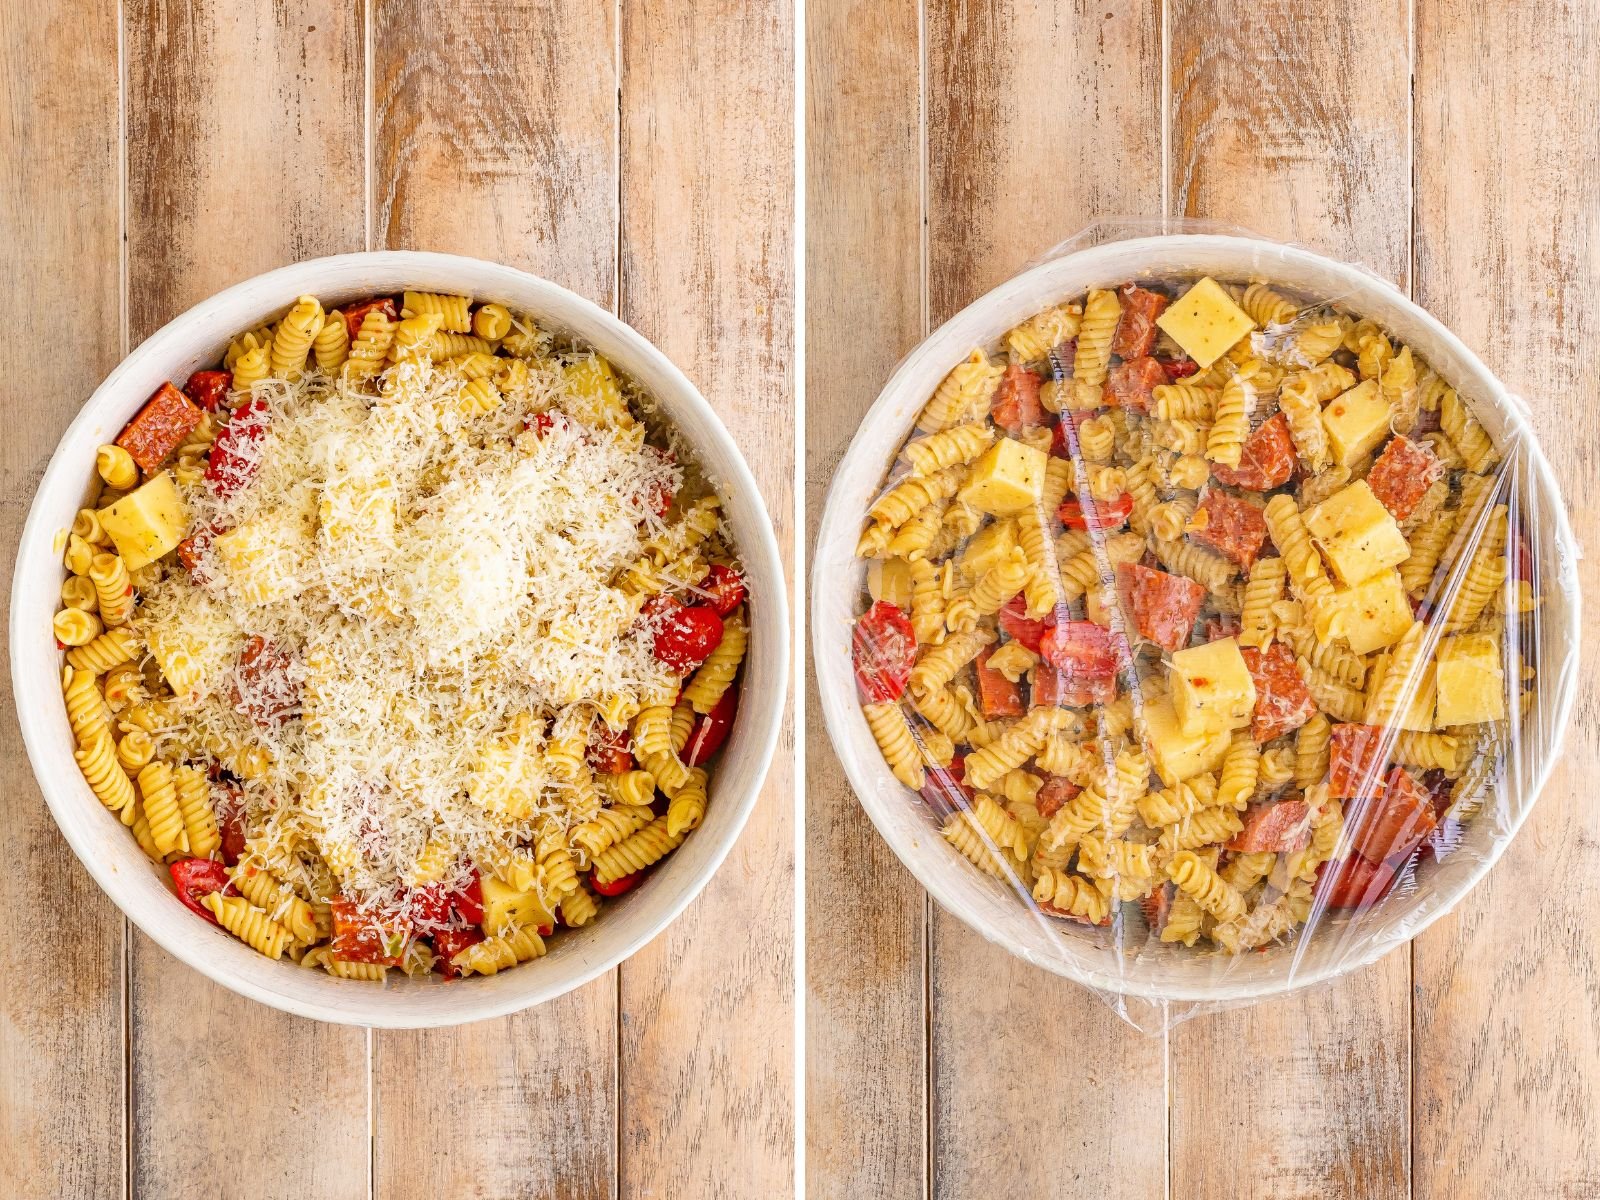 A bowl with pasta salad and grated parmesan cheese on top and a bowl of Pizza Pasta Pepperoni Salad covered with plastic wrap. 